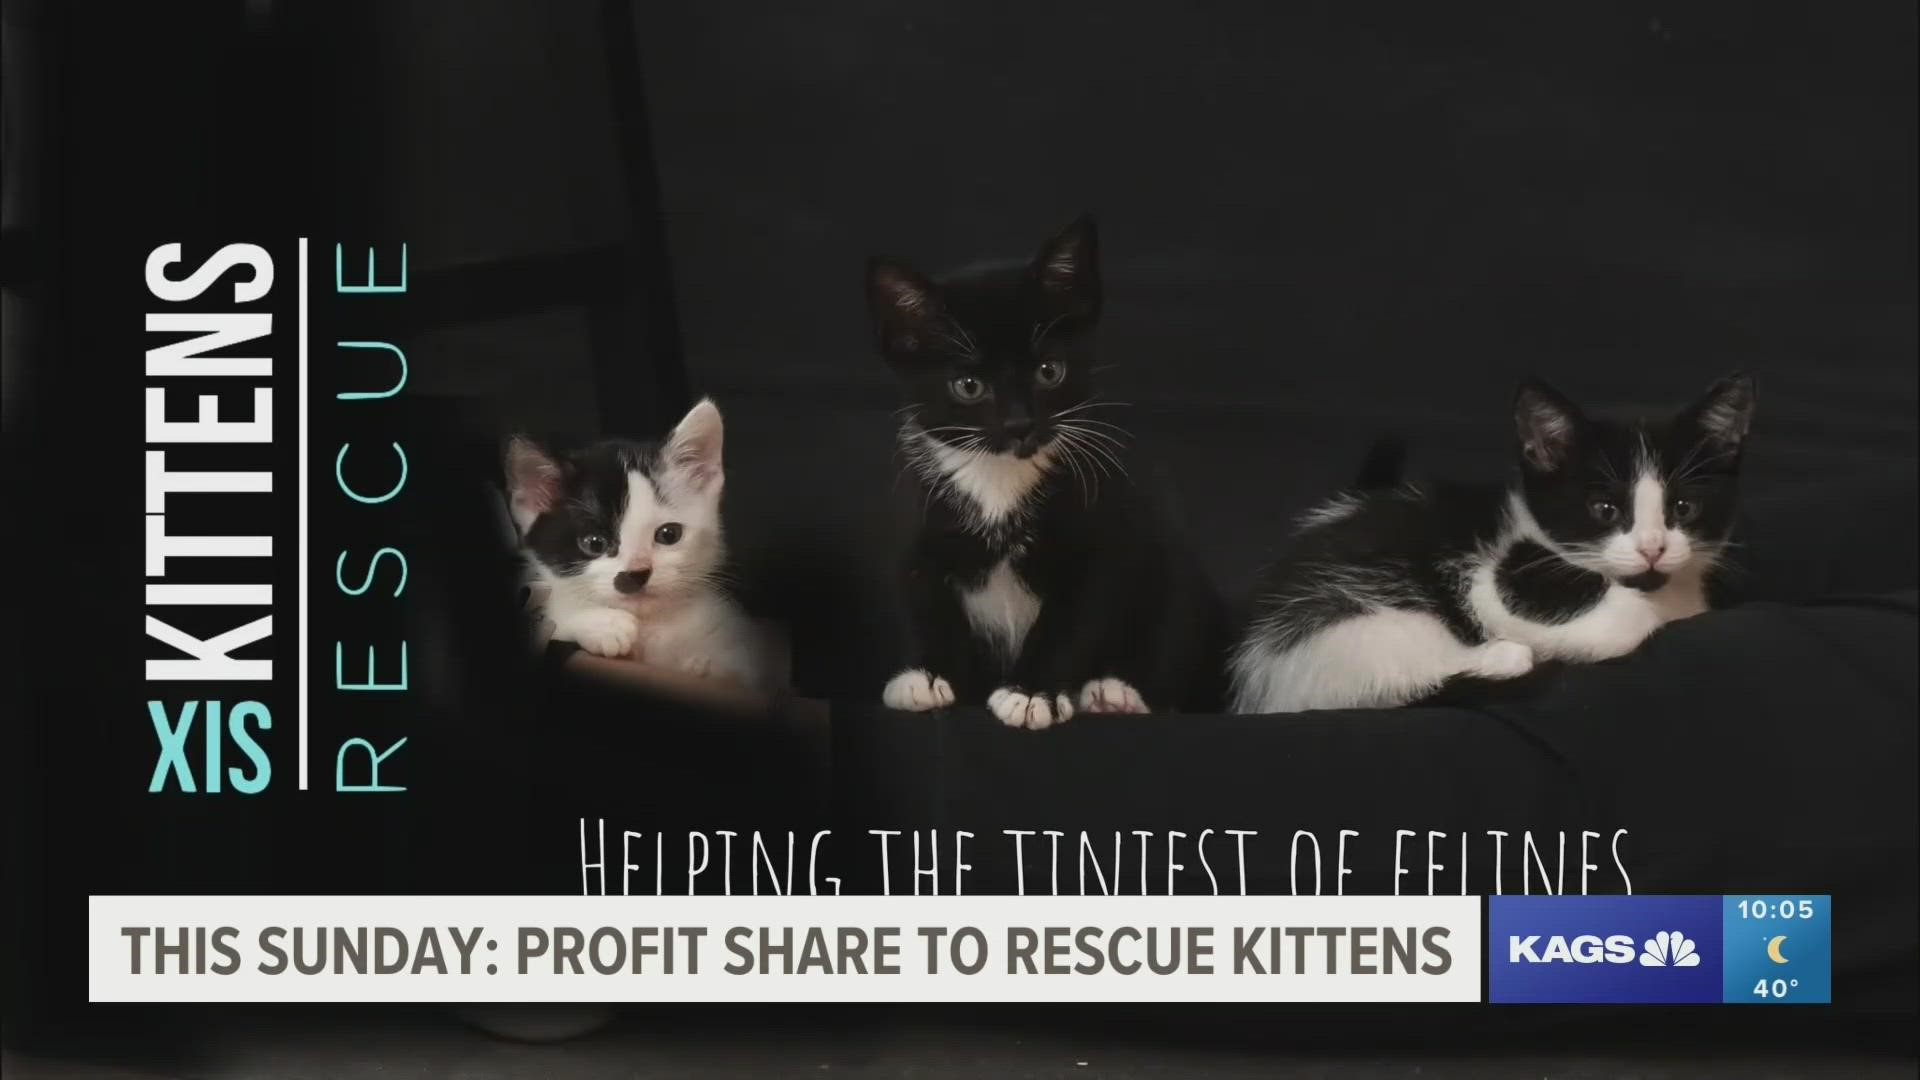 Six Kittens Rescue is partnering with Texas Plant to help kitten rescue efforts once you buy a plant.